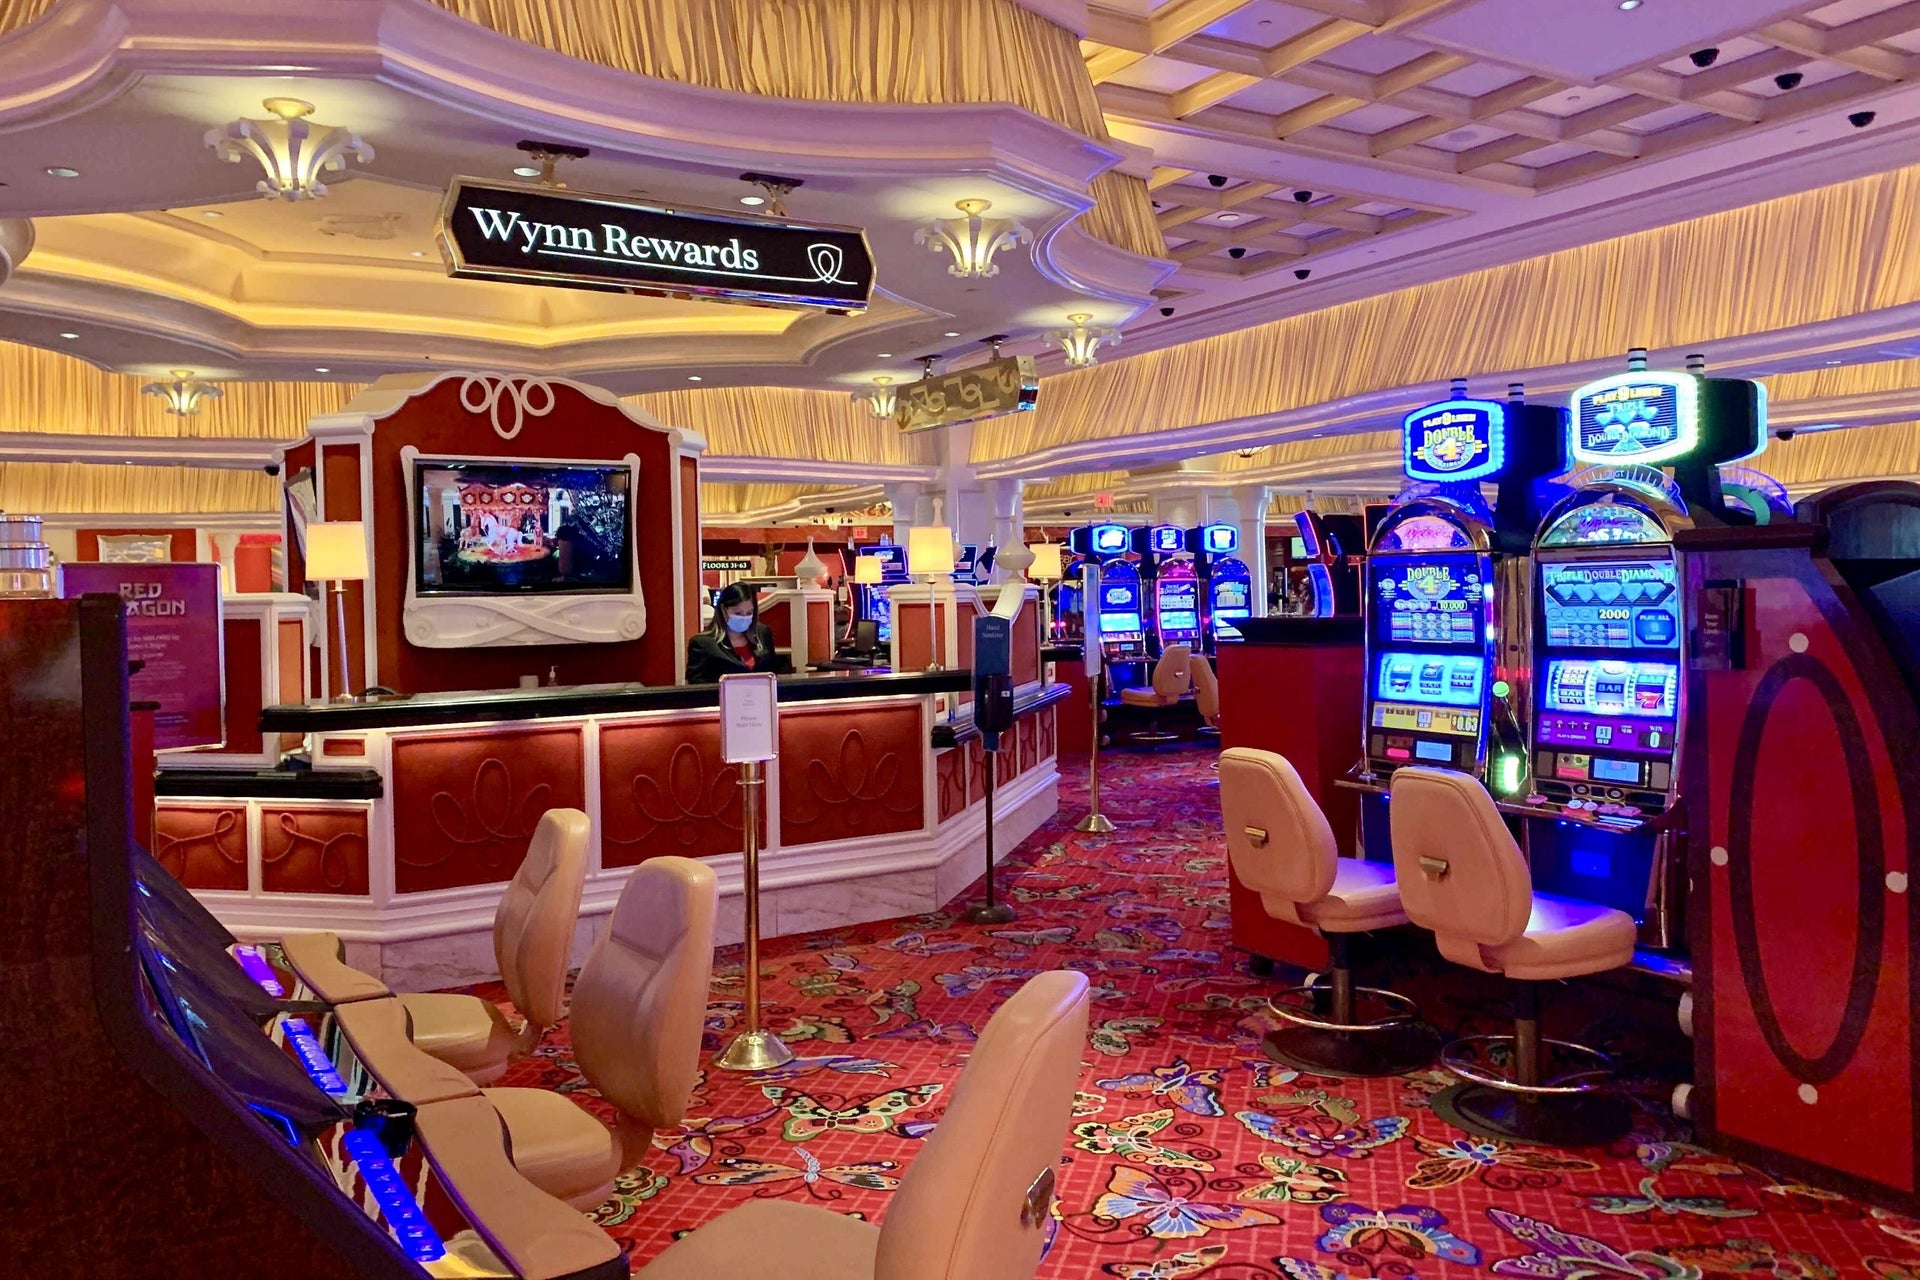 How to status match with Wynn Rewards Get free dinner credits, spa